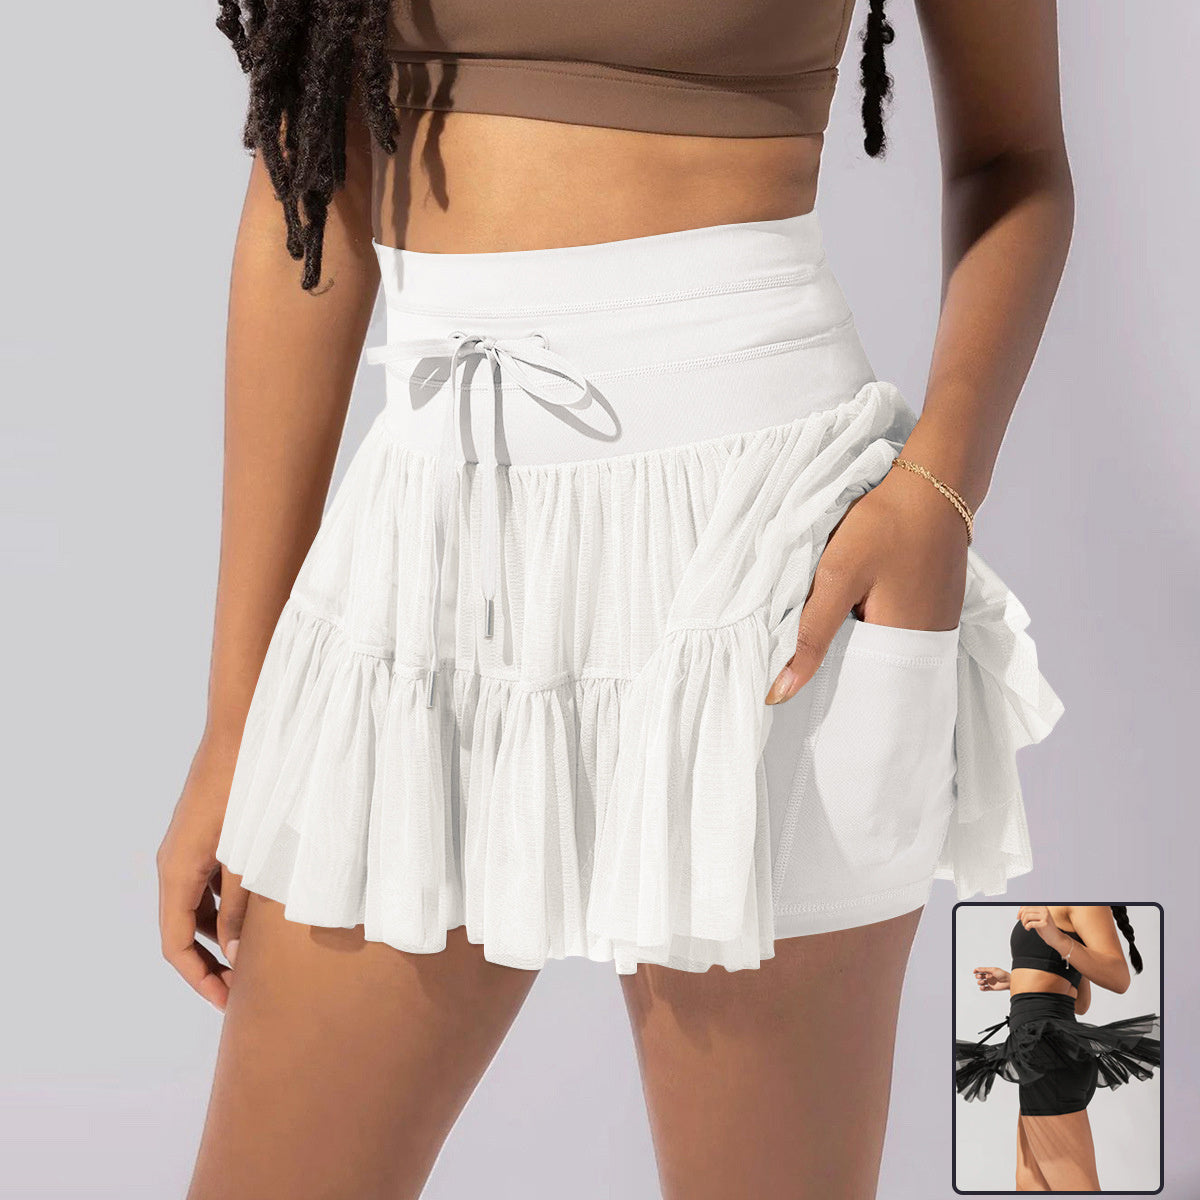 High Waist Lace-Up Sports Skirt with Safety Pants-Hallebeauty